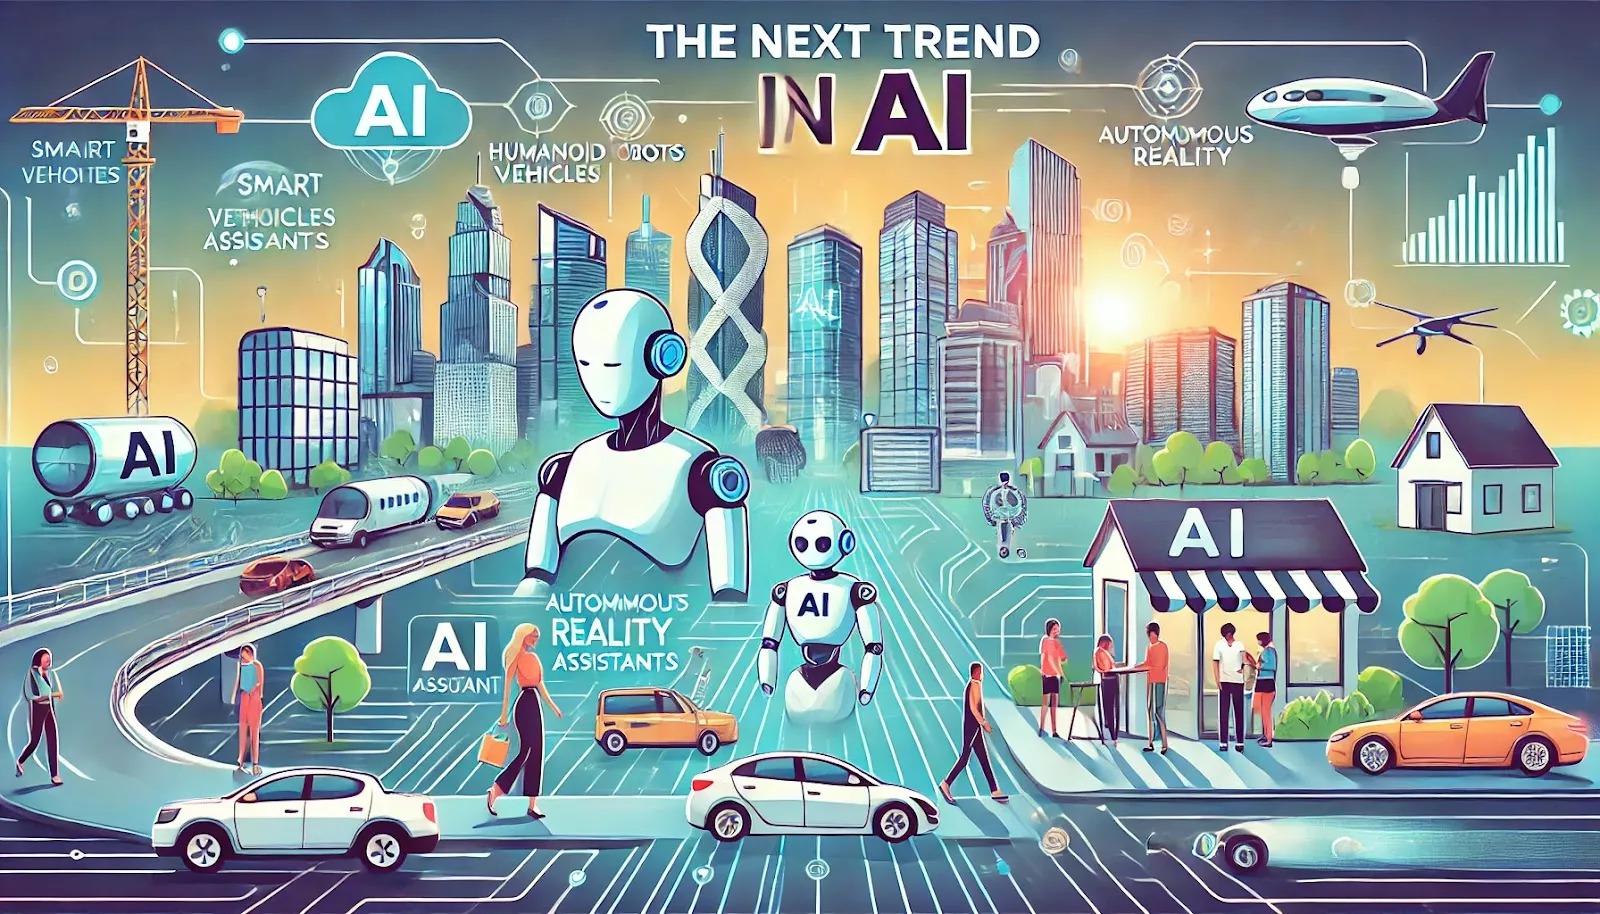 What is the next trend in AI?